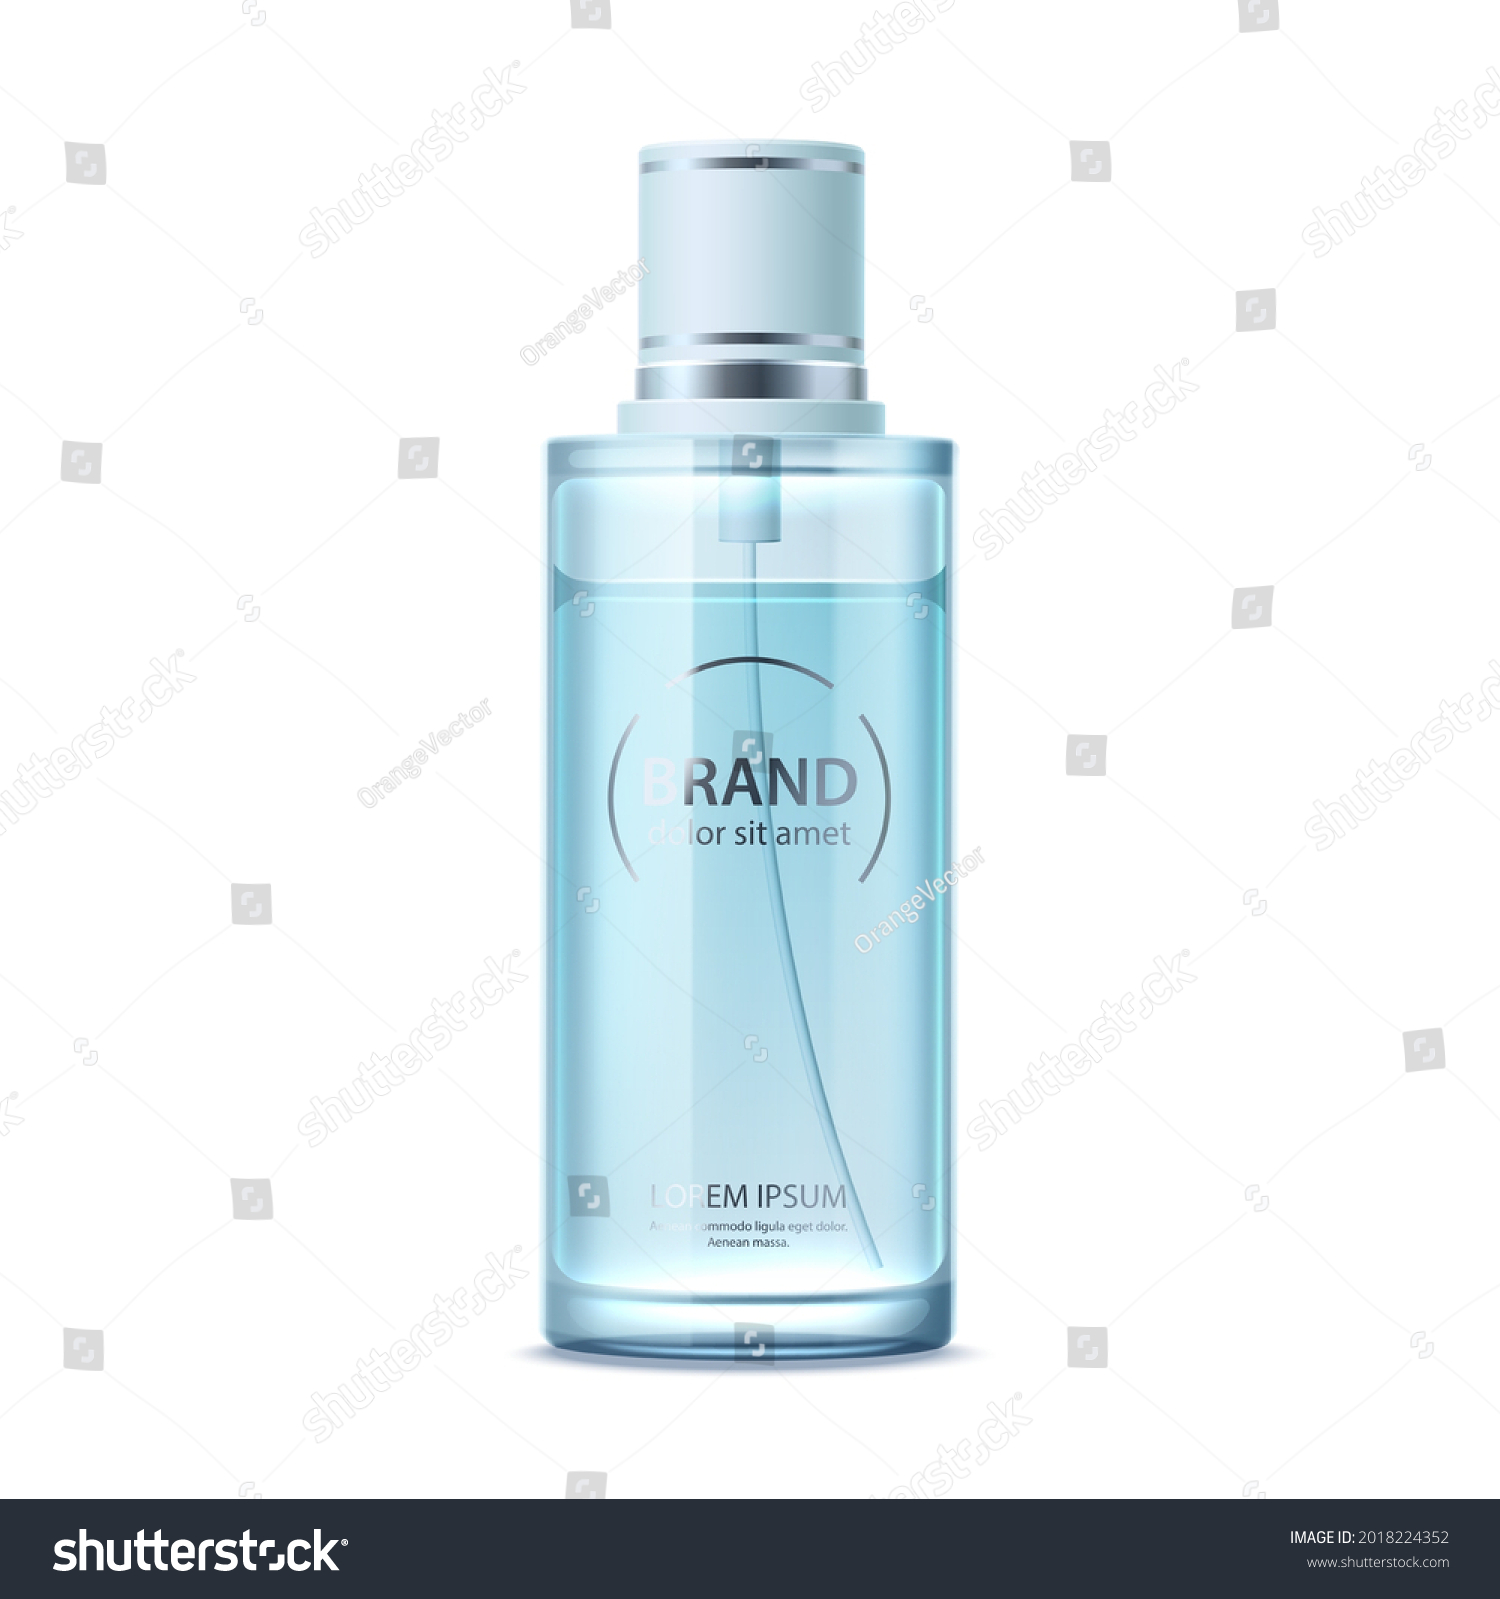 SVG of Vector realistic parfume glass. 3d fragrance spray bottle. Cosmetic cologne lotion. Glamorous product package mockup for advertising design. svg